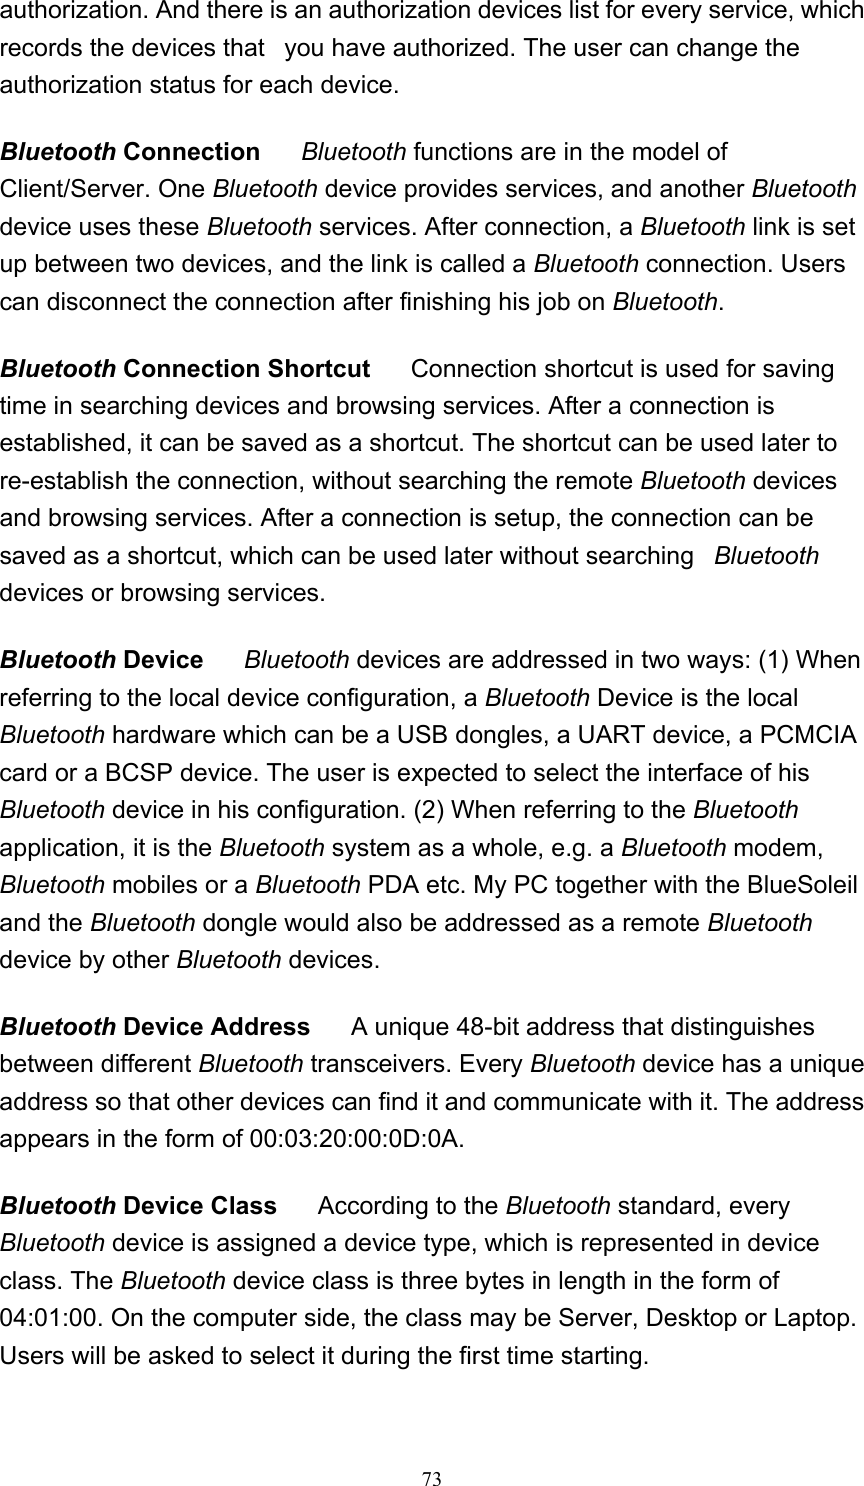   73authorization. And there is an authorization devices list for every service, which records the devices that   you have authorized. The user can change the authorization status for each device. Bluetooth Connection      Bluetooth functions are in the model of Client/Server. One Bluetooth device provides services, and another Bluetooth device uses these Bluetooth services. After connection, a Bluetooth link is set up between two devices, and the link is called a Bluetooth connection. Users can disconnect the connection after finishing his job on Bluetooth.  Bluetooth Connection Shortcut      Connection shortcut is used for saving time in searching devices and browsing services. After a connection is established, it can be saved as a shortcut. The shortcut can be used later to re-establish the connection, without searching the remote Bluetooth devices and browsing services. After a connection is setup, the connection can be saved as a shortcut, which can be used later without searching   Bluetooth devices or browsing services.  Bluetooth Device     Bluetooth devices are addressed in two ways: (1) When referring to the local device configuration, a Bluetooth Device is the local Bluetooth hardware which can be a USB dongles, a UART device, a PCMCIA card or a BCSP device. The user is expected to select the interface of his Bluetooth device in his configuration. (2) When referring to the Bluetooth application, it is the Bluetooth system as a whole, e.g. a Bluetooth modem, Bluetooth mobiles or a Bluetooth PDA etc. My PC together with the BlueSoleil and the Bluetooth dongle would also be addressed as a remote Bluetooth device by other Bluetooth devices.  Bluetooth Device Address      A unique 48-bit address that distinguishes between different Bluetooth transceivers. Every Bluetooth device has a unique address so that other devices can find it and communicate with it. The address appears in the form of 00:03:20:00:0D:0A.  Bluetooth Device Class      According to the Bluetooth standard, every Bluetooth device is assigned a device type, which is represented in device class. The Bluetooth device class is three bytes in length in the form of 04:01:00. On the computer side, the class may be Server, Desktop or Laptop. Users will be asked to select it during the first time starting.  